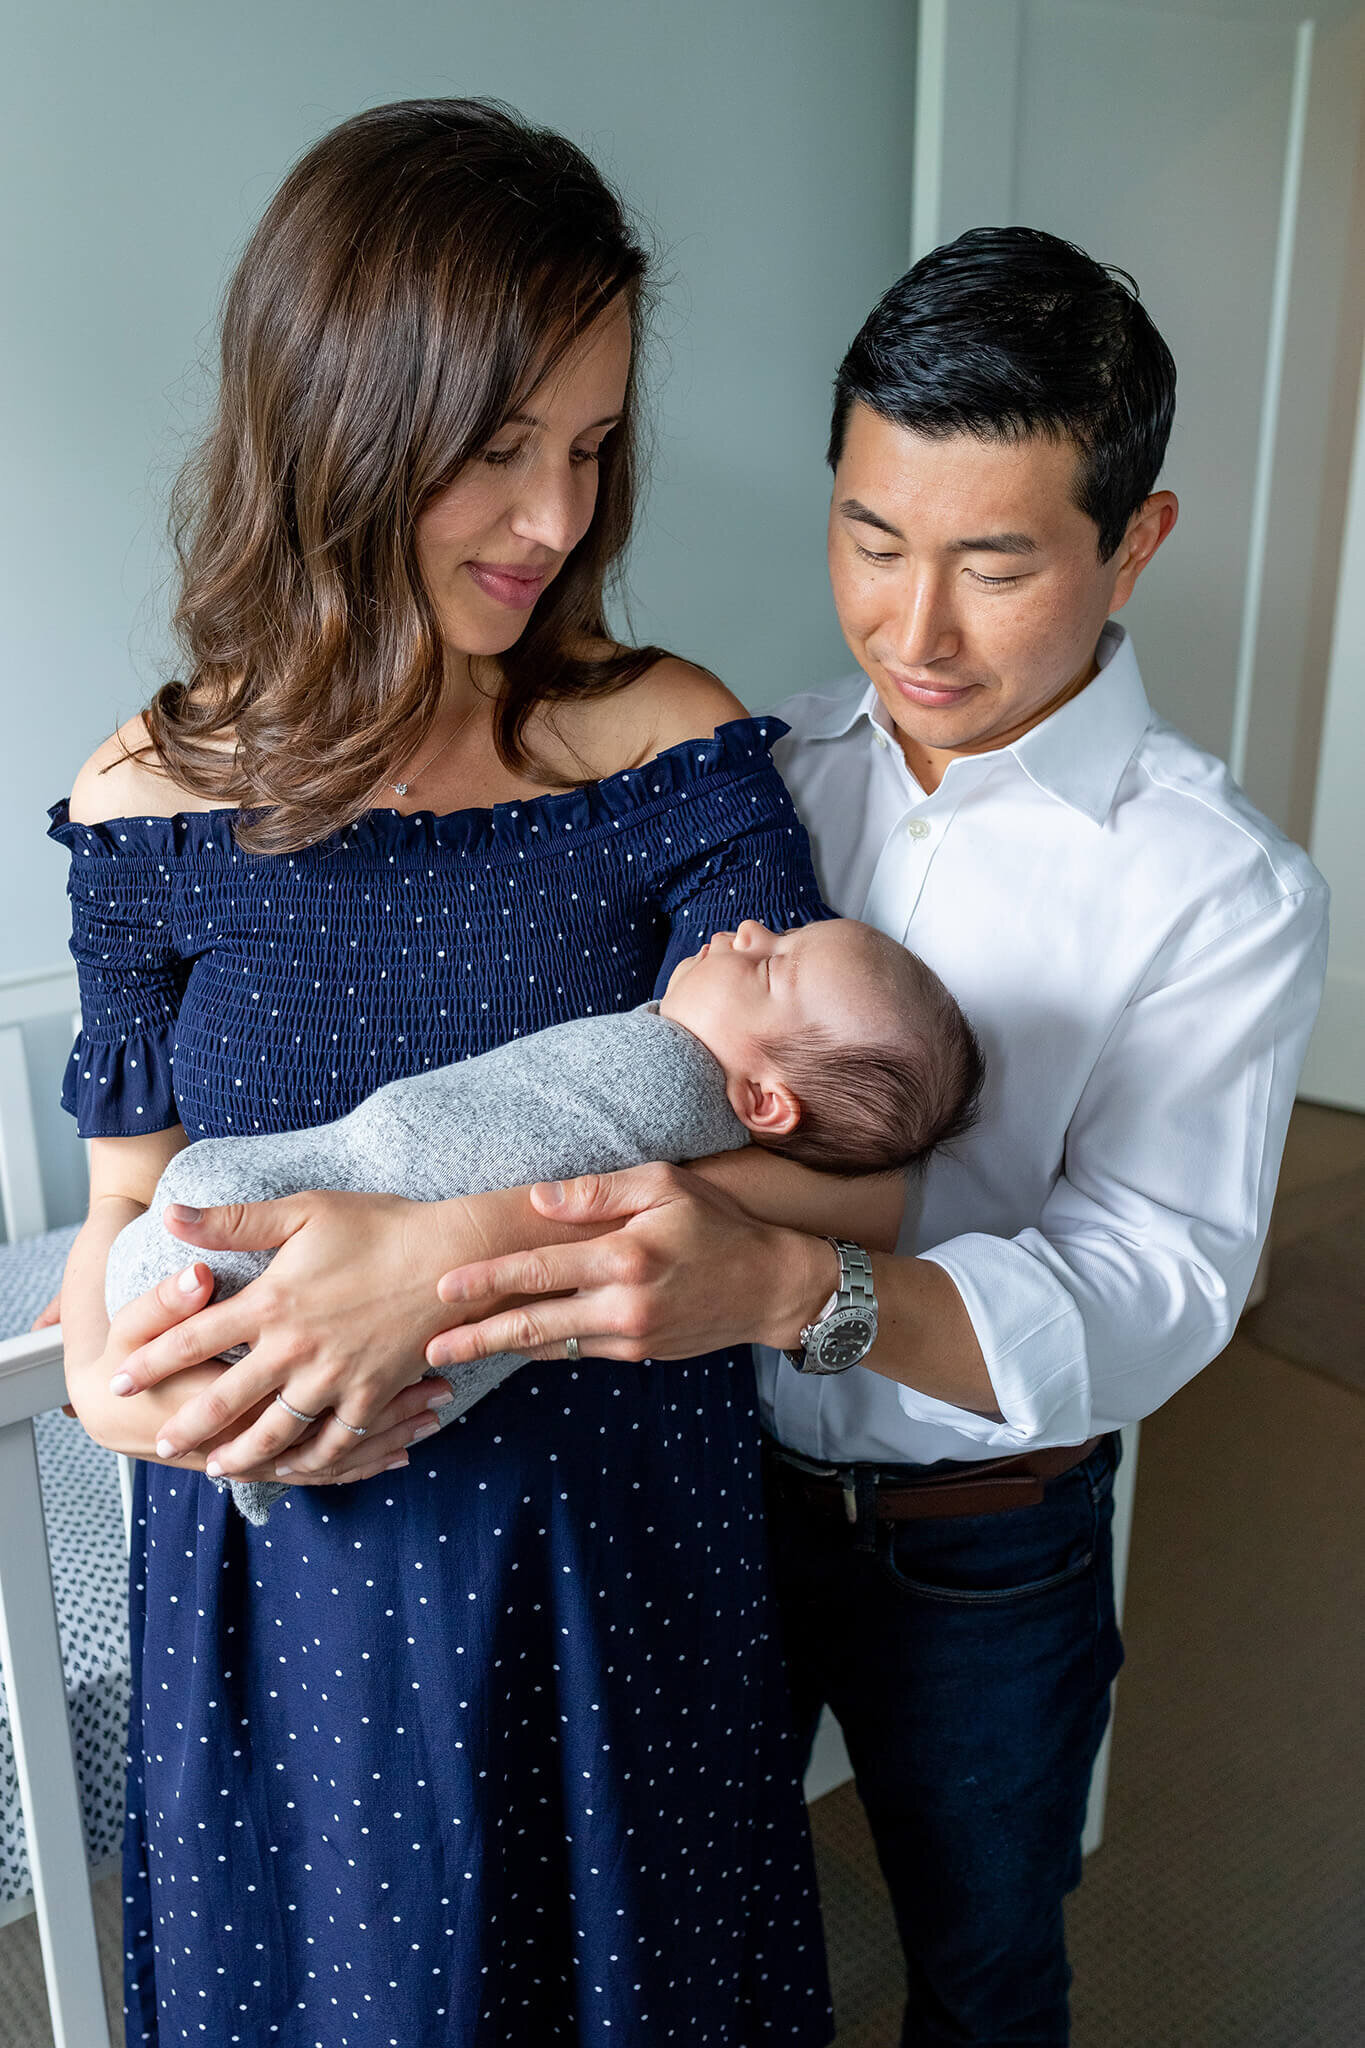 A husband and wife holding their newborn baby boy during their Northern Virginia newborn photo session.